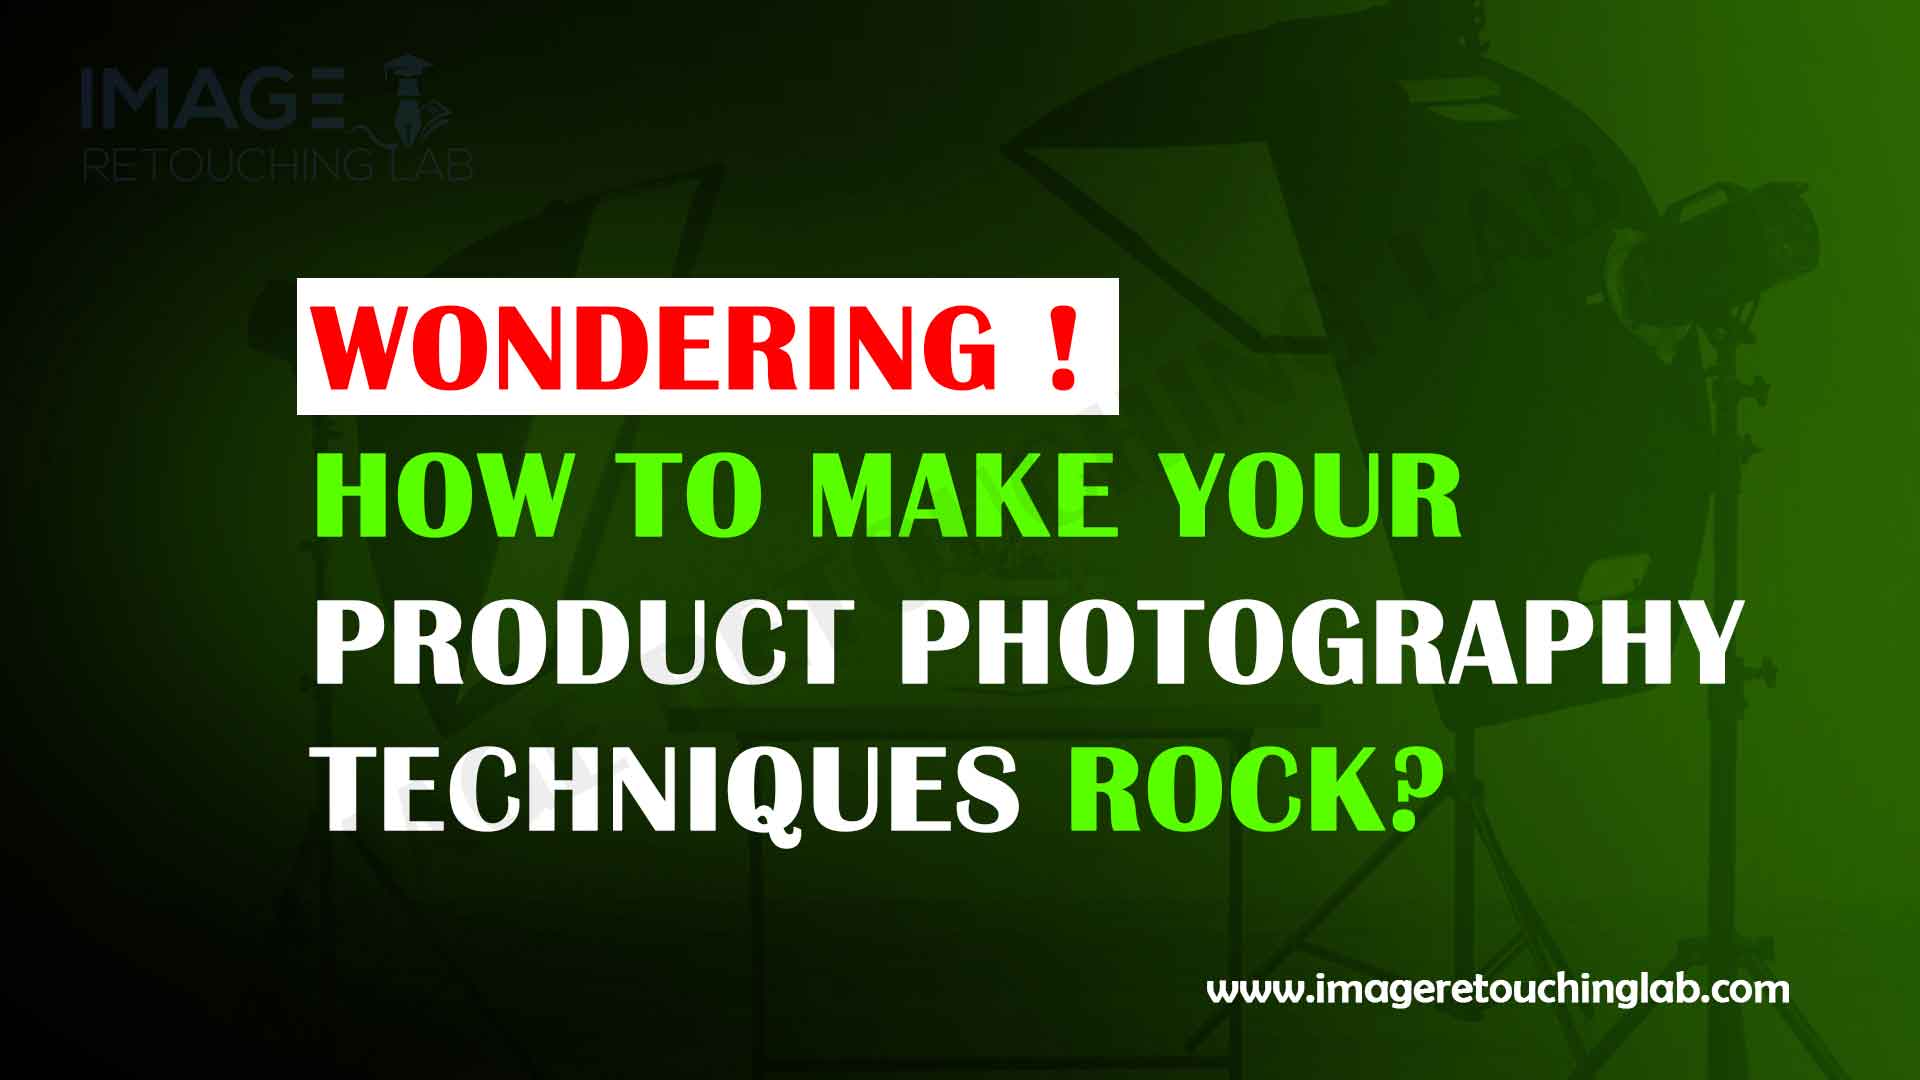 Copy of Wondering How to Make Your Product Photography Techniques Rock